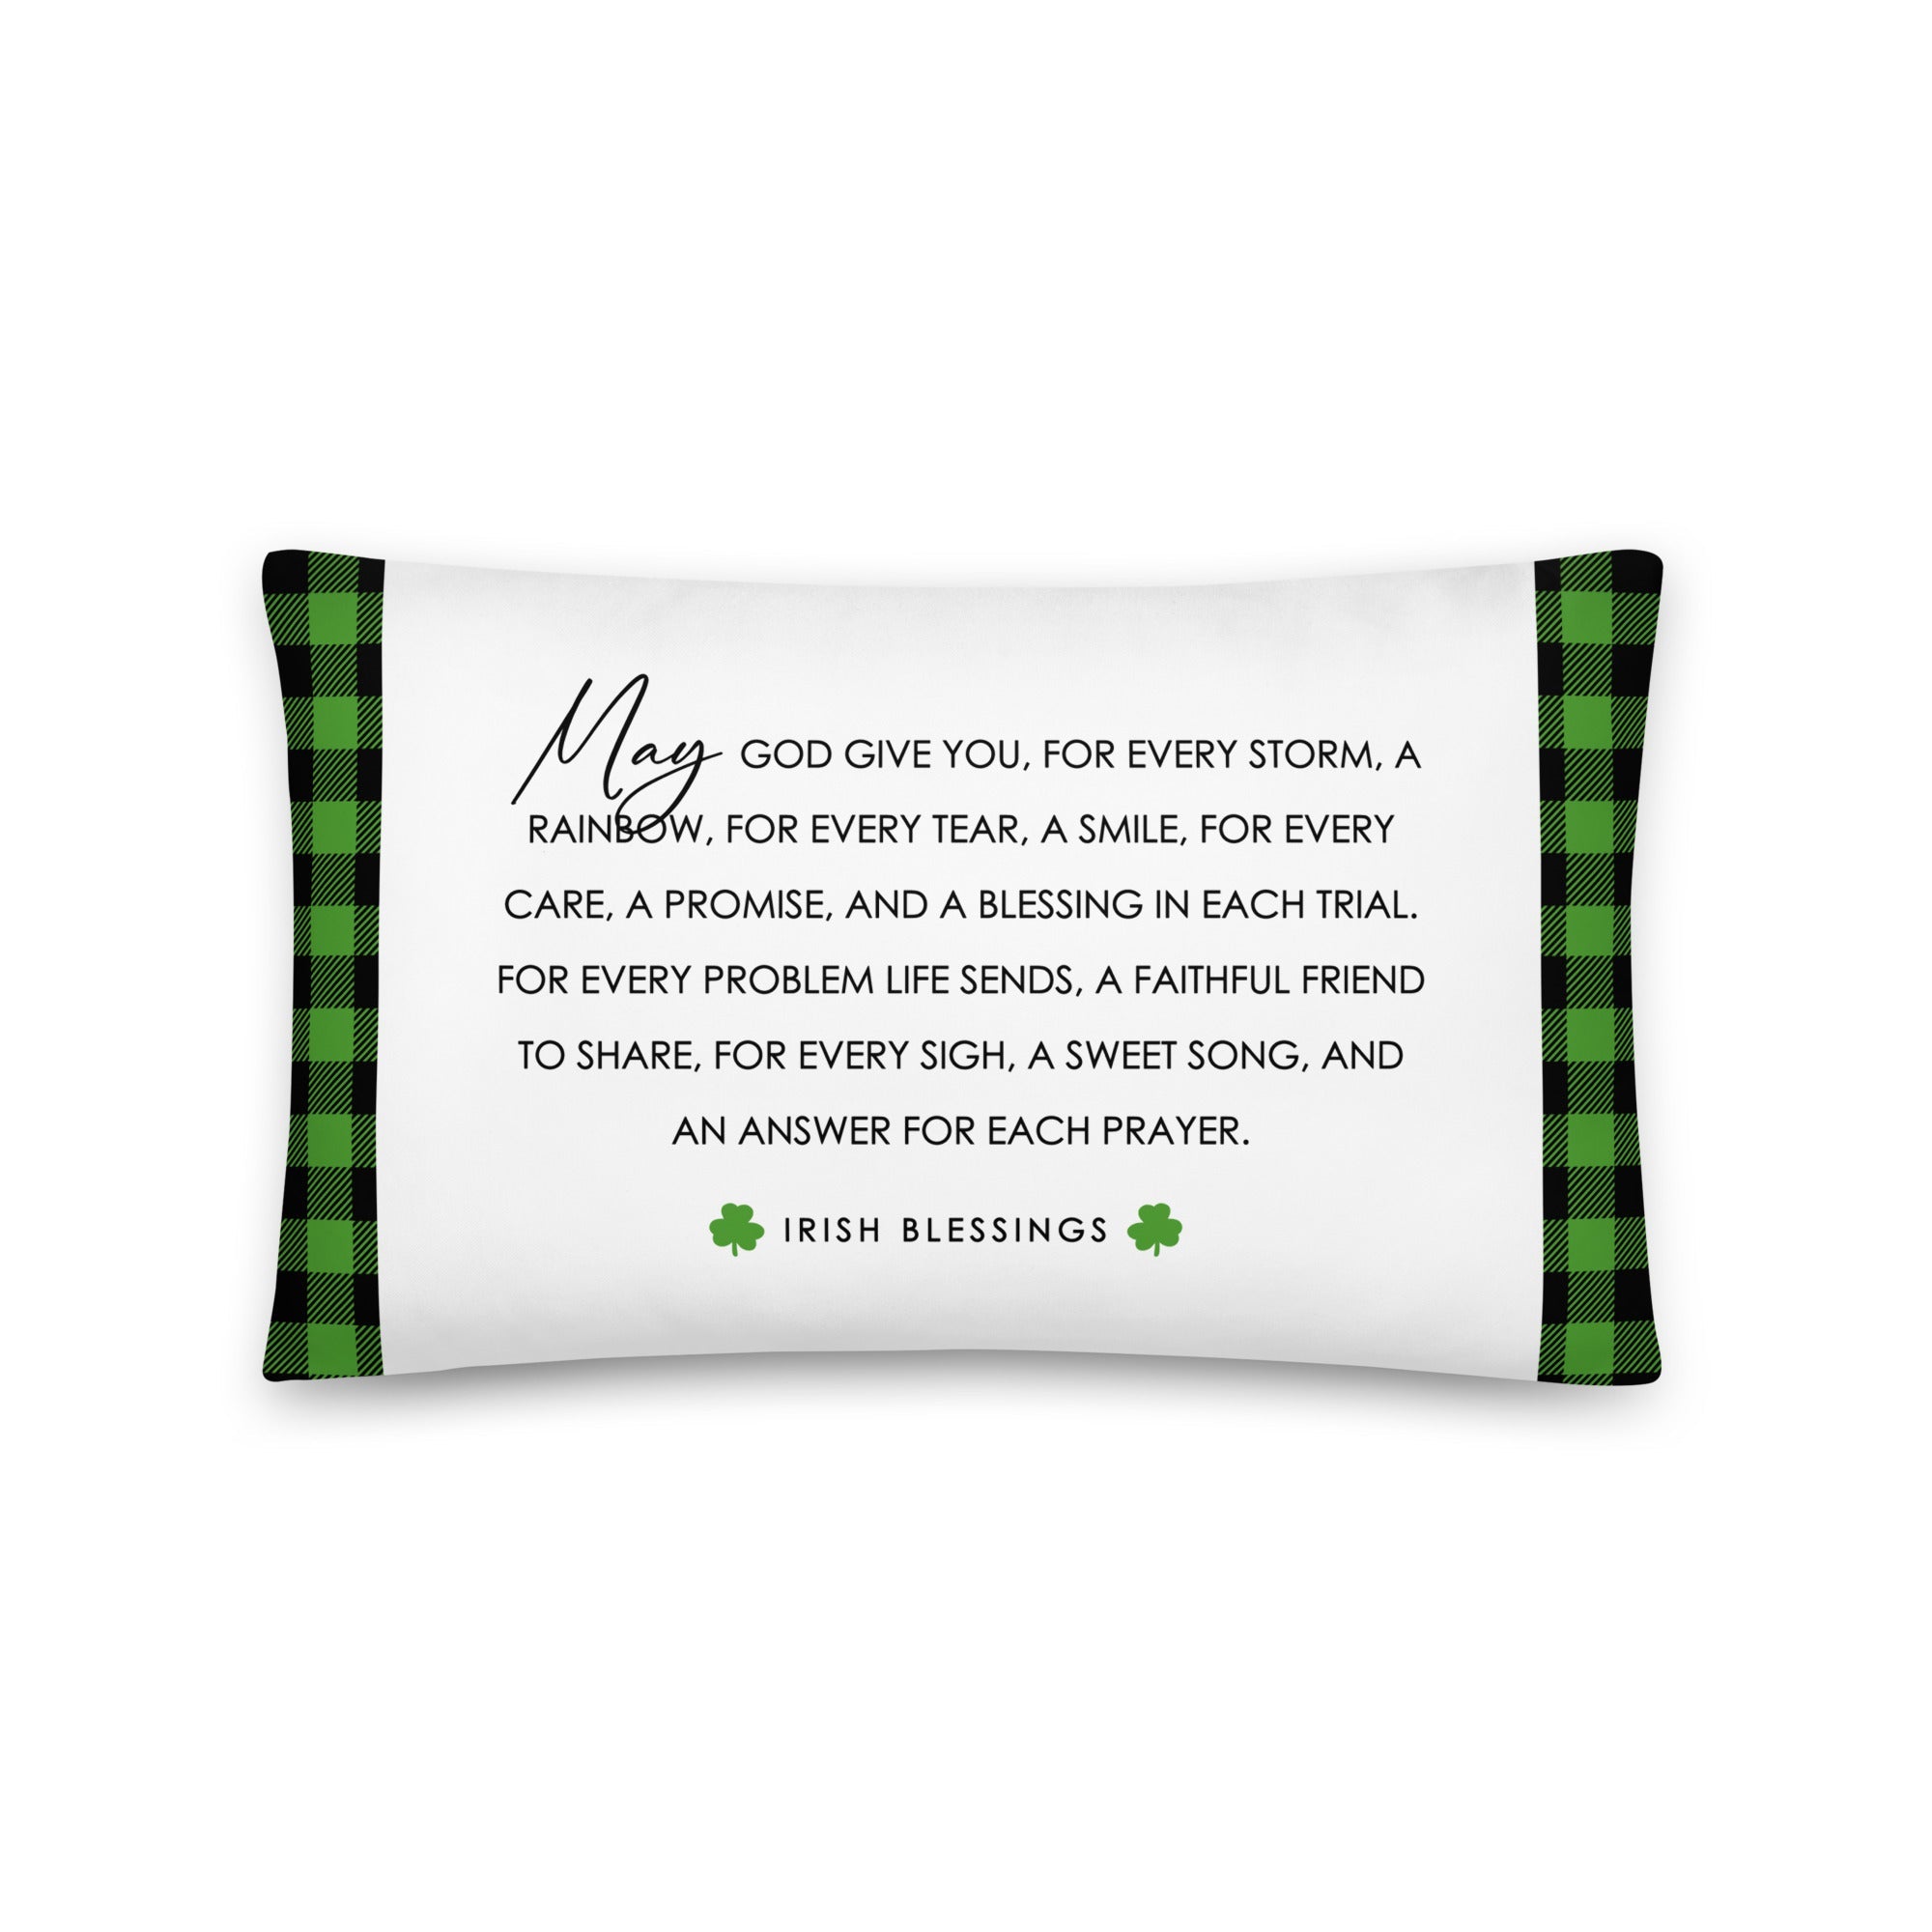 St. Patrick's Day Decorative Throw Pillow - May God Give You - LifeSong Milestones